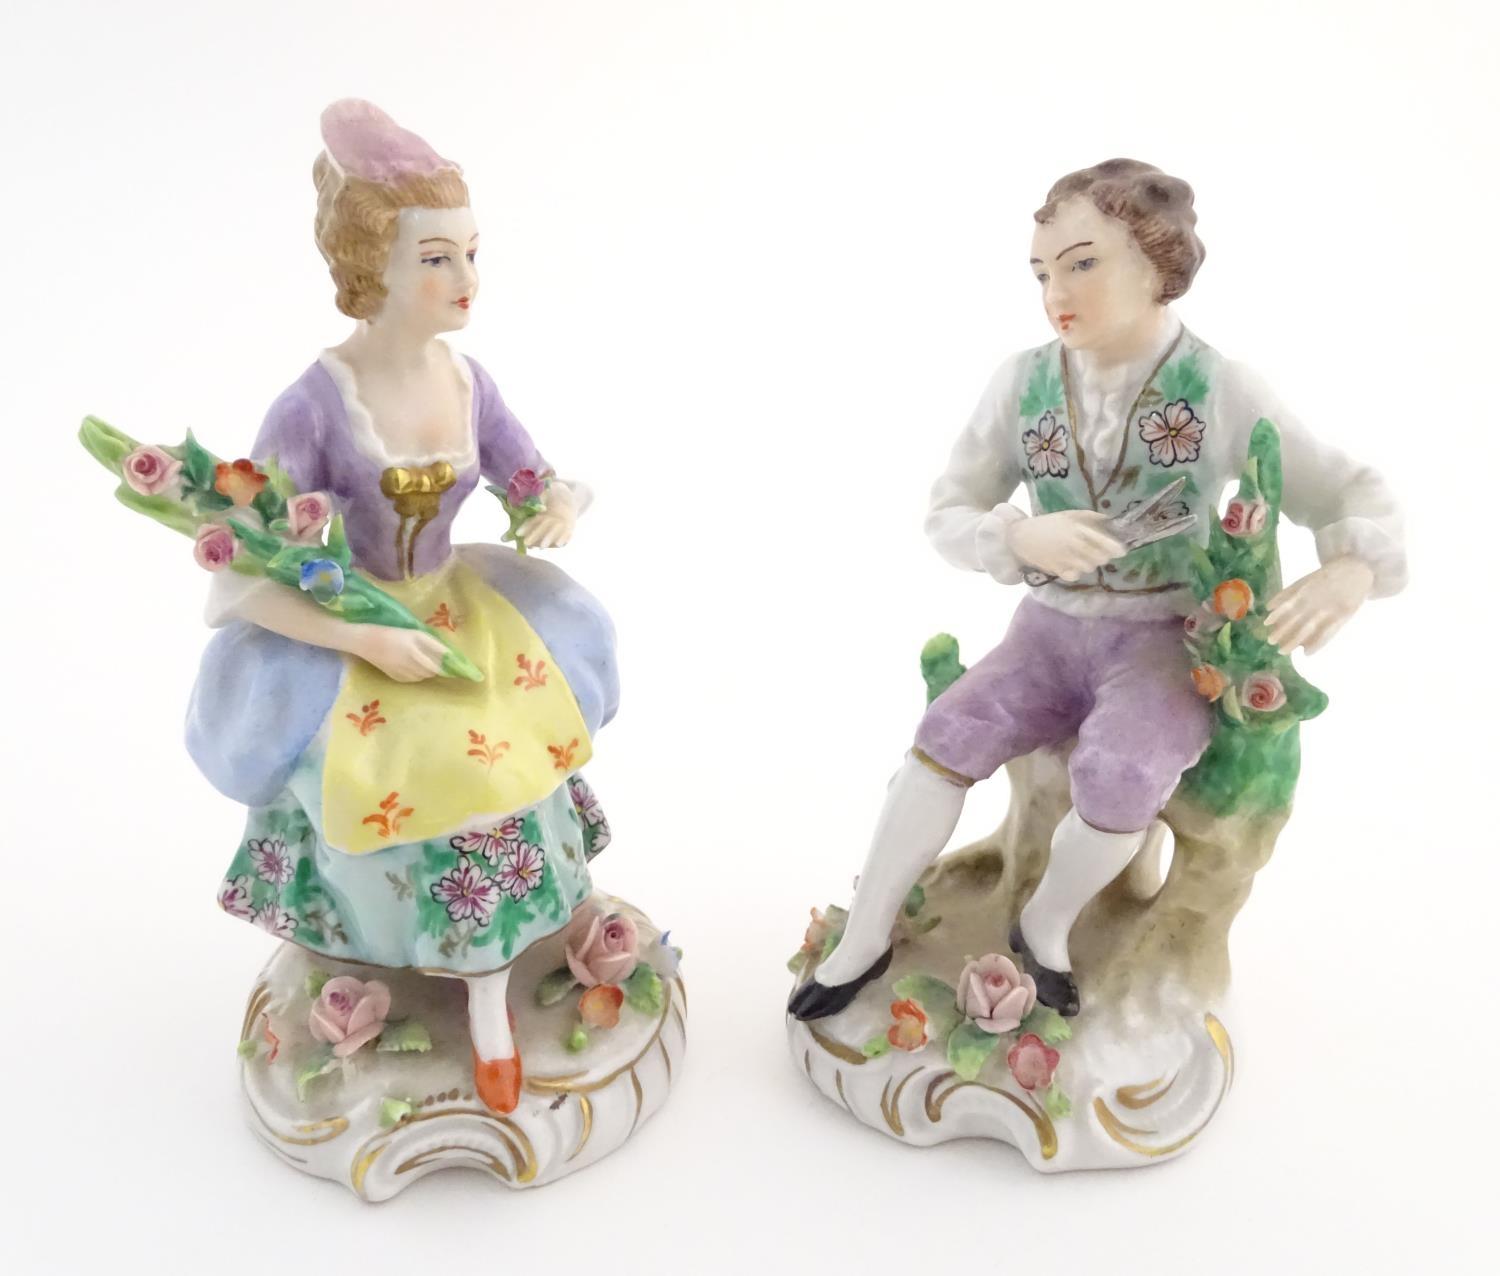 A pair of German Sitzendorf porcelain florist figures, a gentleman and lady, each seated on a - Image 7 of 20